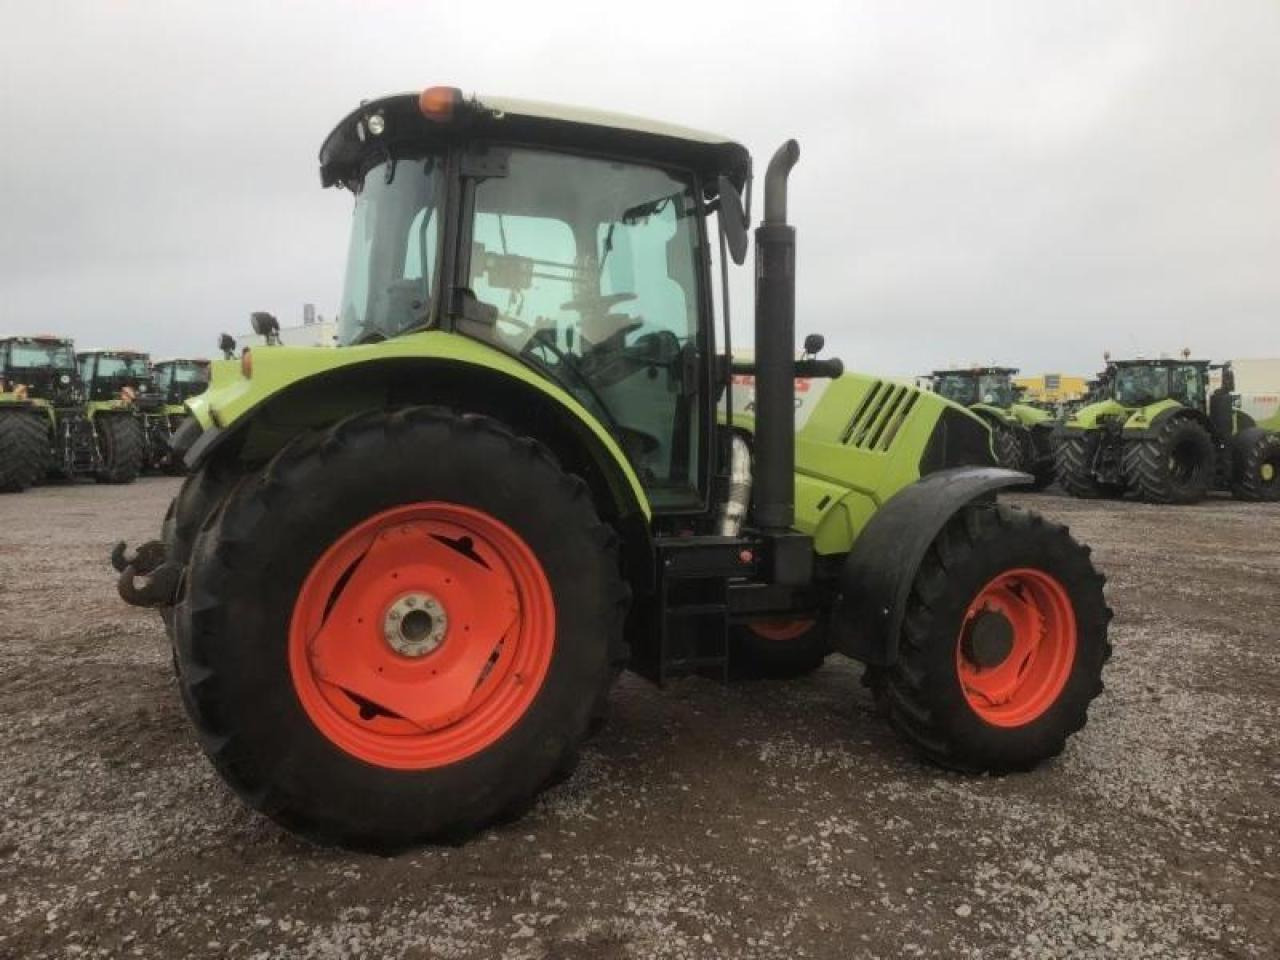 Tractor CLAAS arion 620 t3b